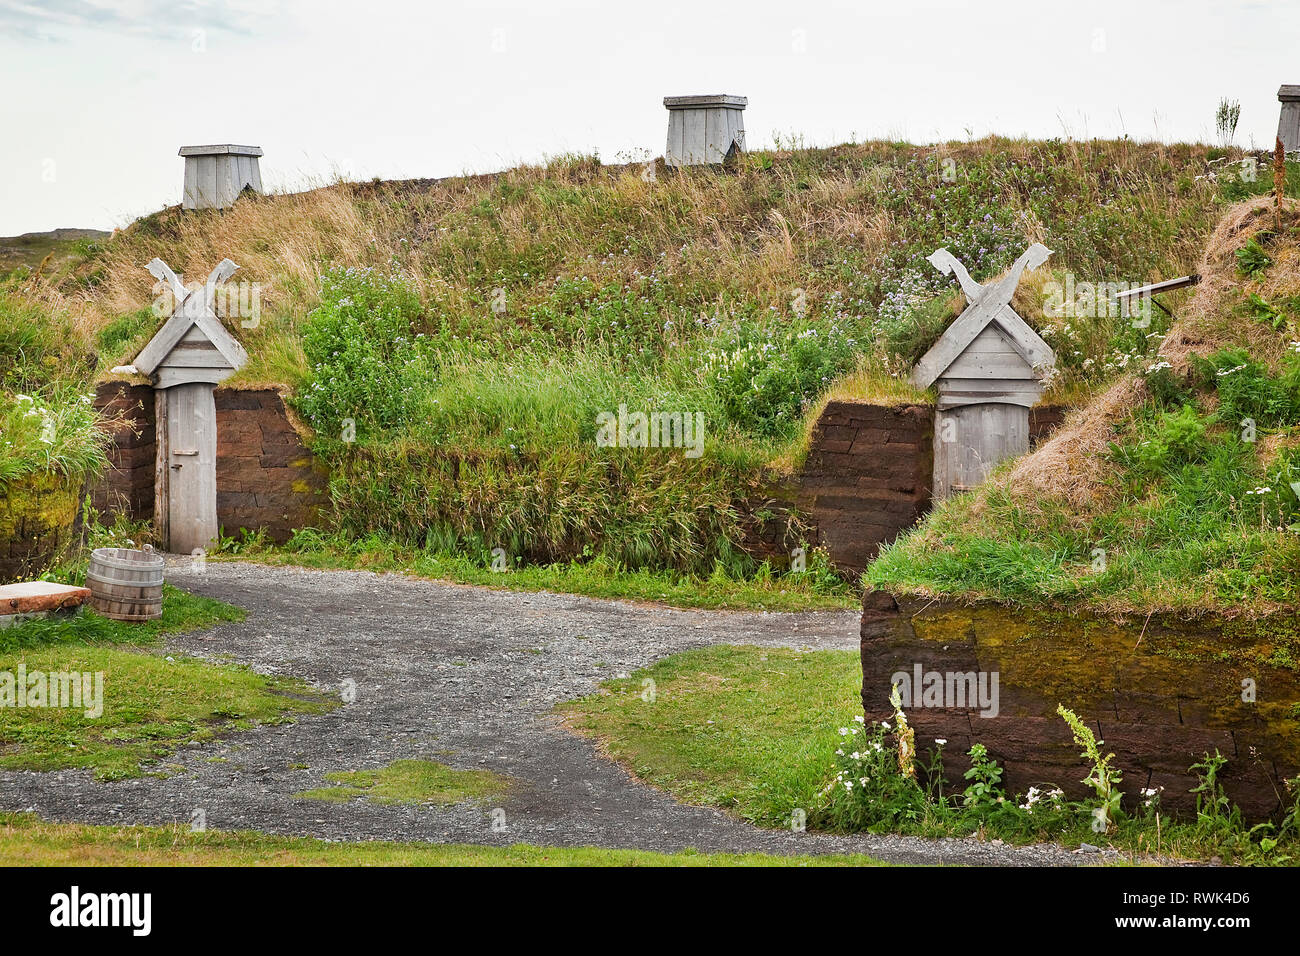 Exterior of a recreated Viking longhouse with its characteristic sod roof and peat block walls. L'Anse aux Meadows National Historic Site, L'Anse aux Meadows, Newfoundland, Canada Stock Photo